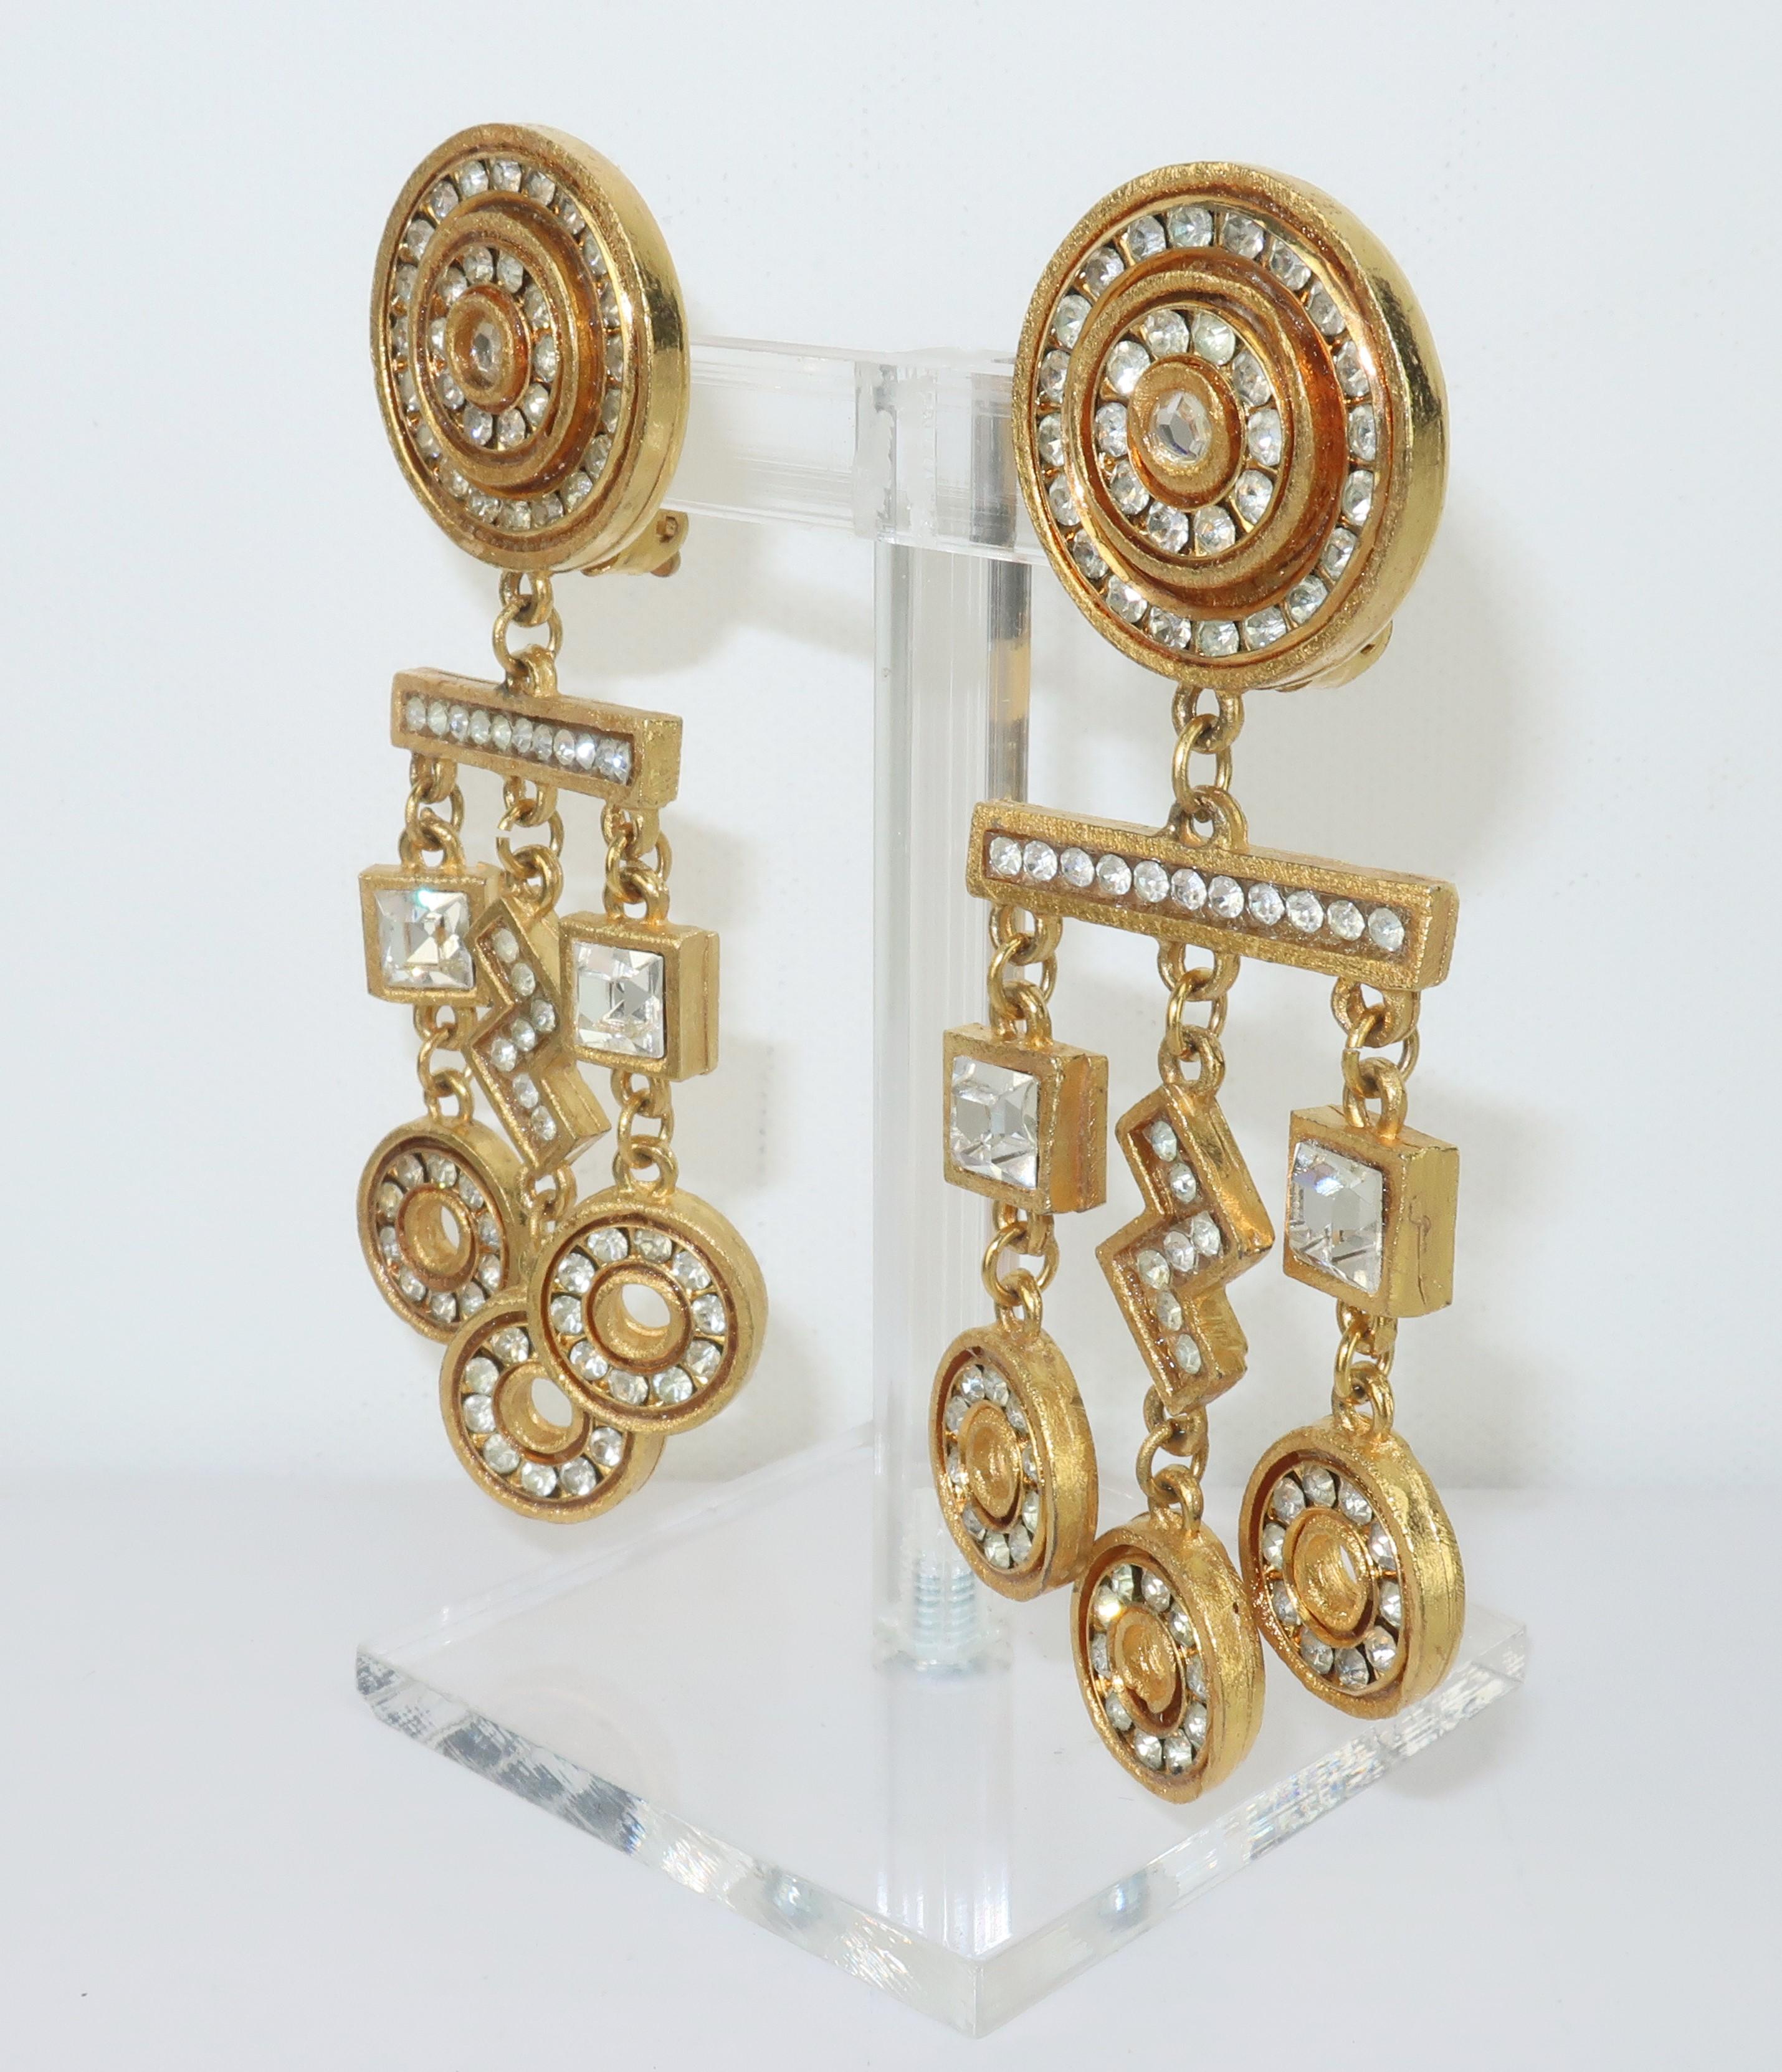 Gerard Yosca gold tone geometric dangle earrings accented by crystal rhinestones.  The statement making design has an Art Deco revival look.  Outfitted with clip on hardware and hallmarked to the back of each earring.
CONDITION
Very good vintage